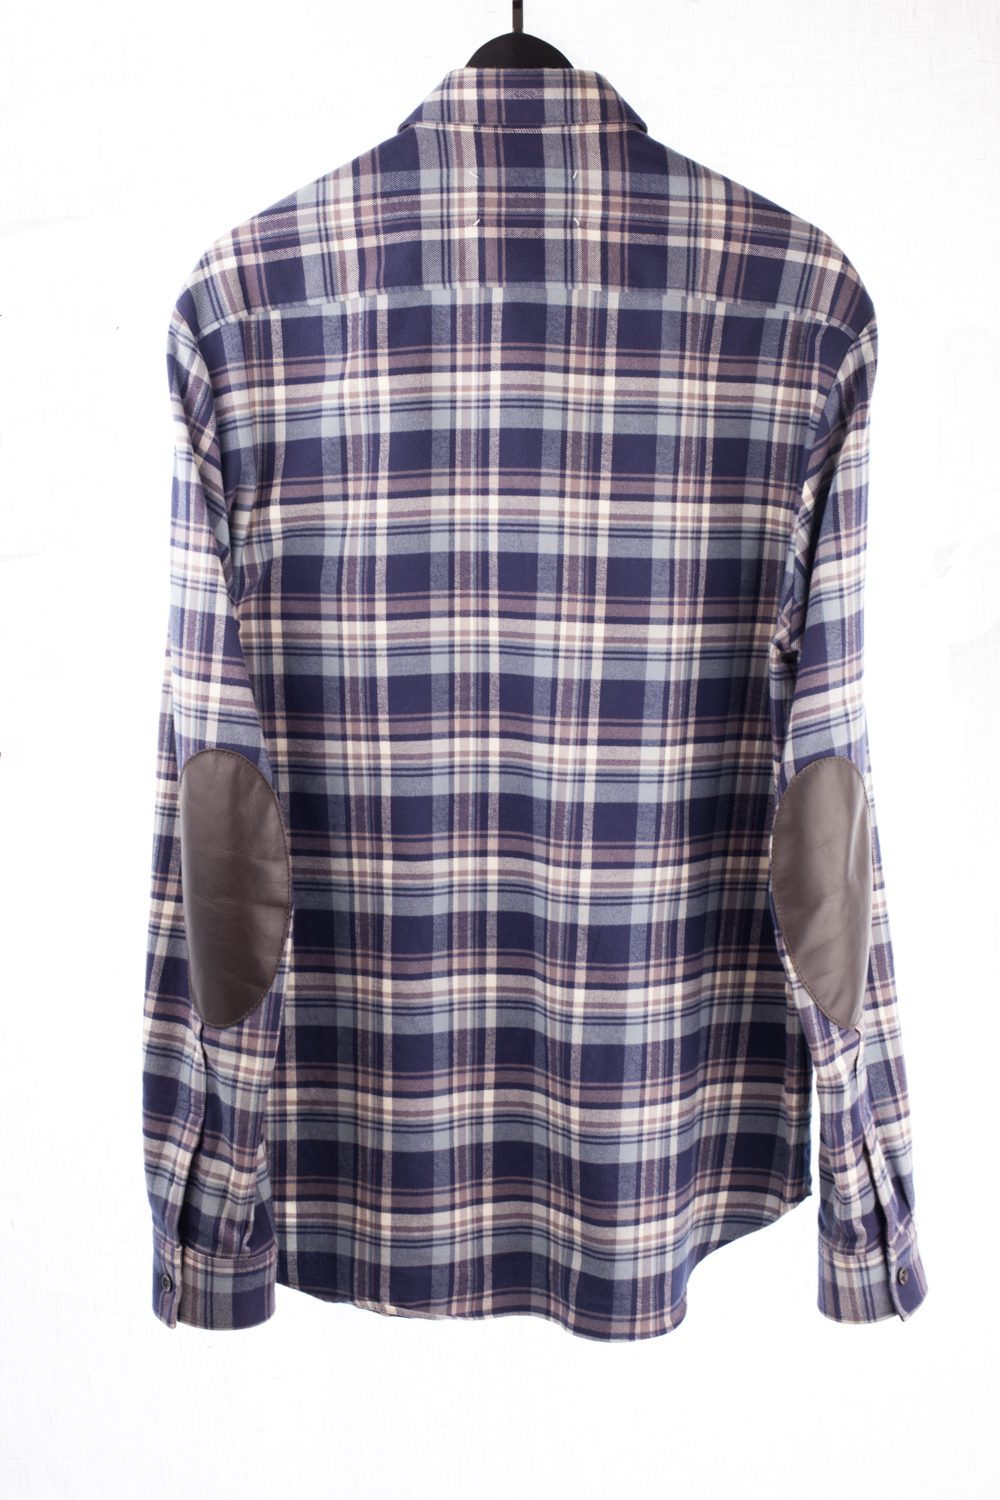 Line 10 Margiela Flannel with Elbow Pads